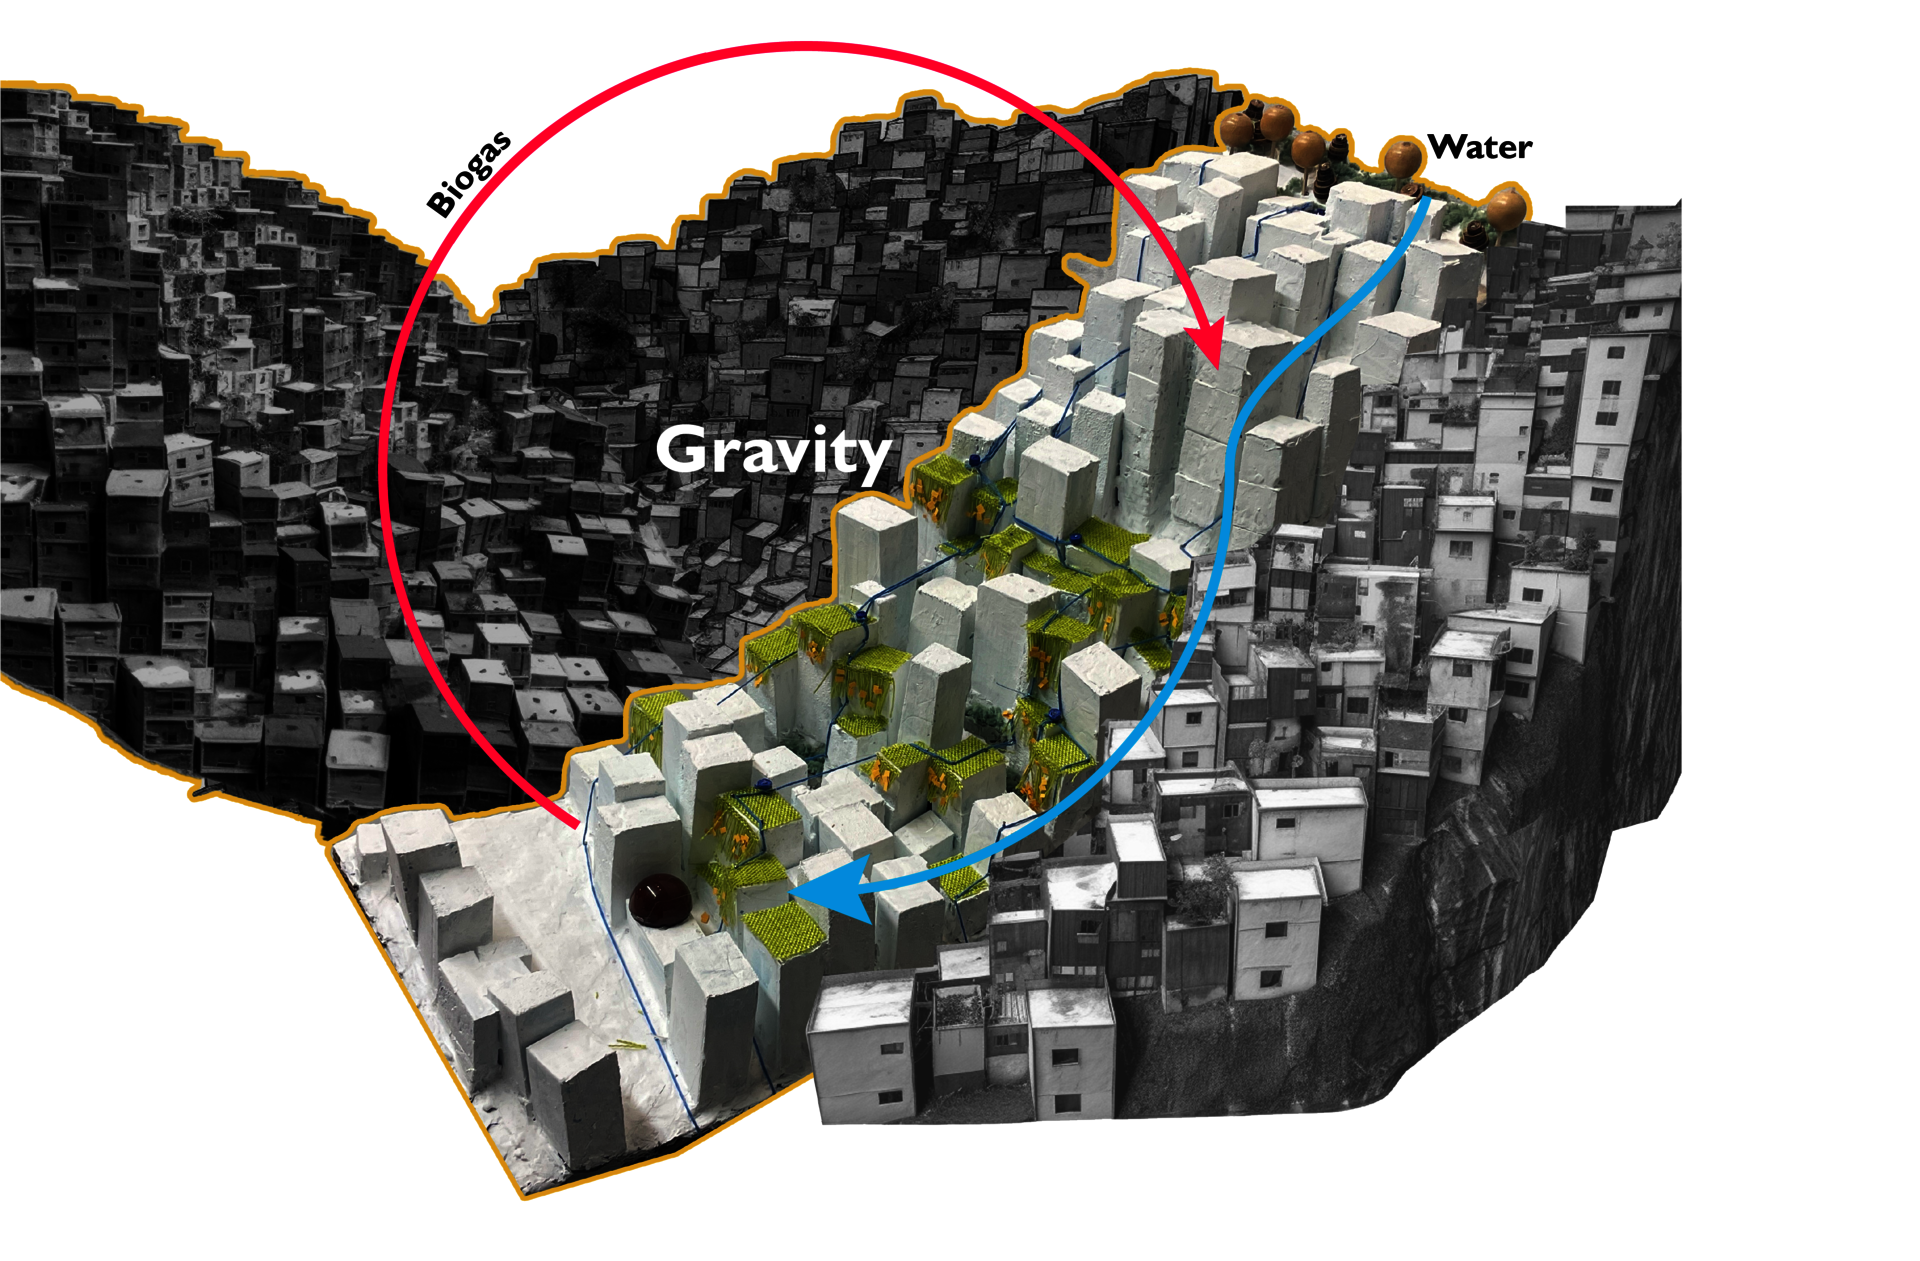 Use gravity to transport water and biogas resources passively and without cost.